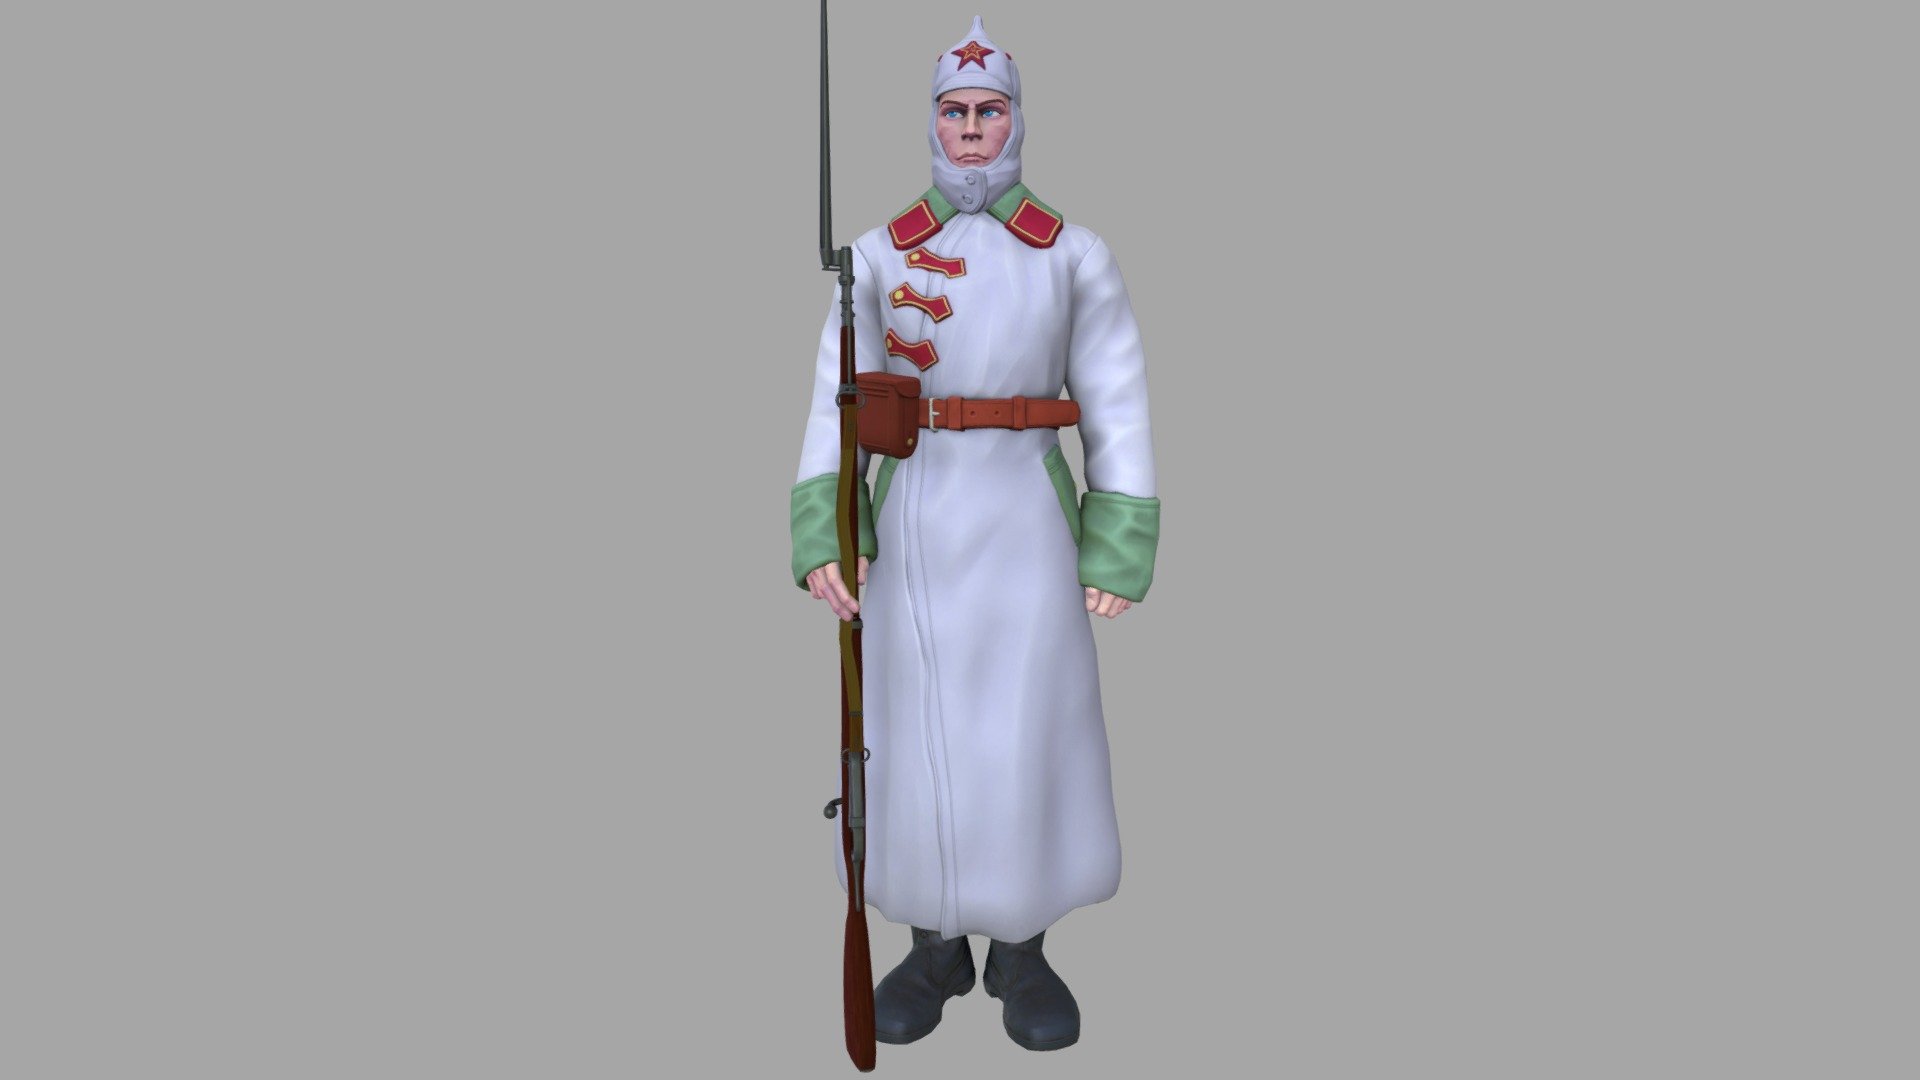 My new 3D model, this time I decided to make a guy like this. For those who don’t know, he wears a “Budenovka” cloth helmet on his head. The man is armed with a Mosin rifle. Soviet soldier in winter uniform of the Red Army 1920. The 3D model was made in the 3D blender program, has rigging and skinning. Big_Black_Anaconda art 3d model